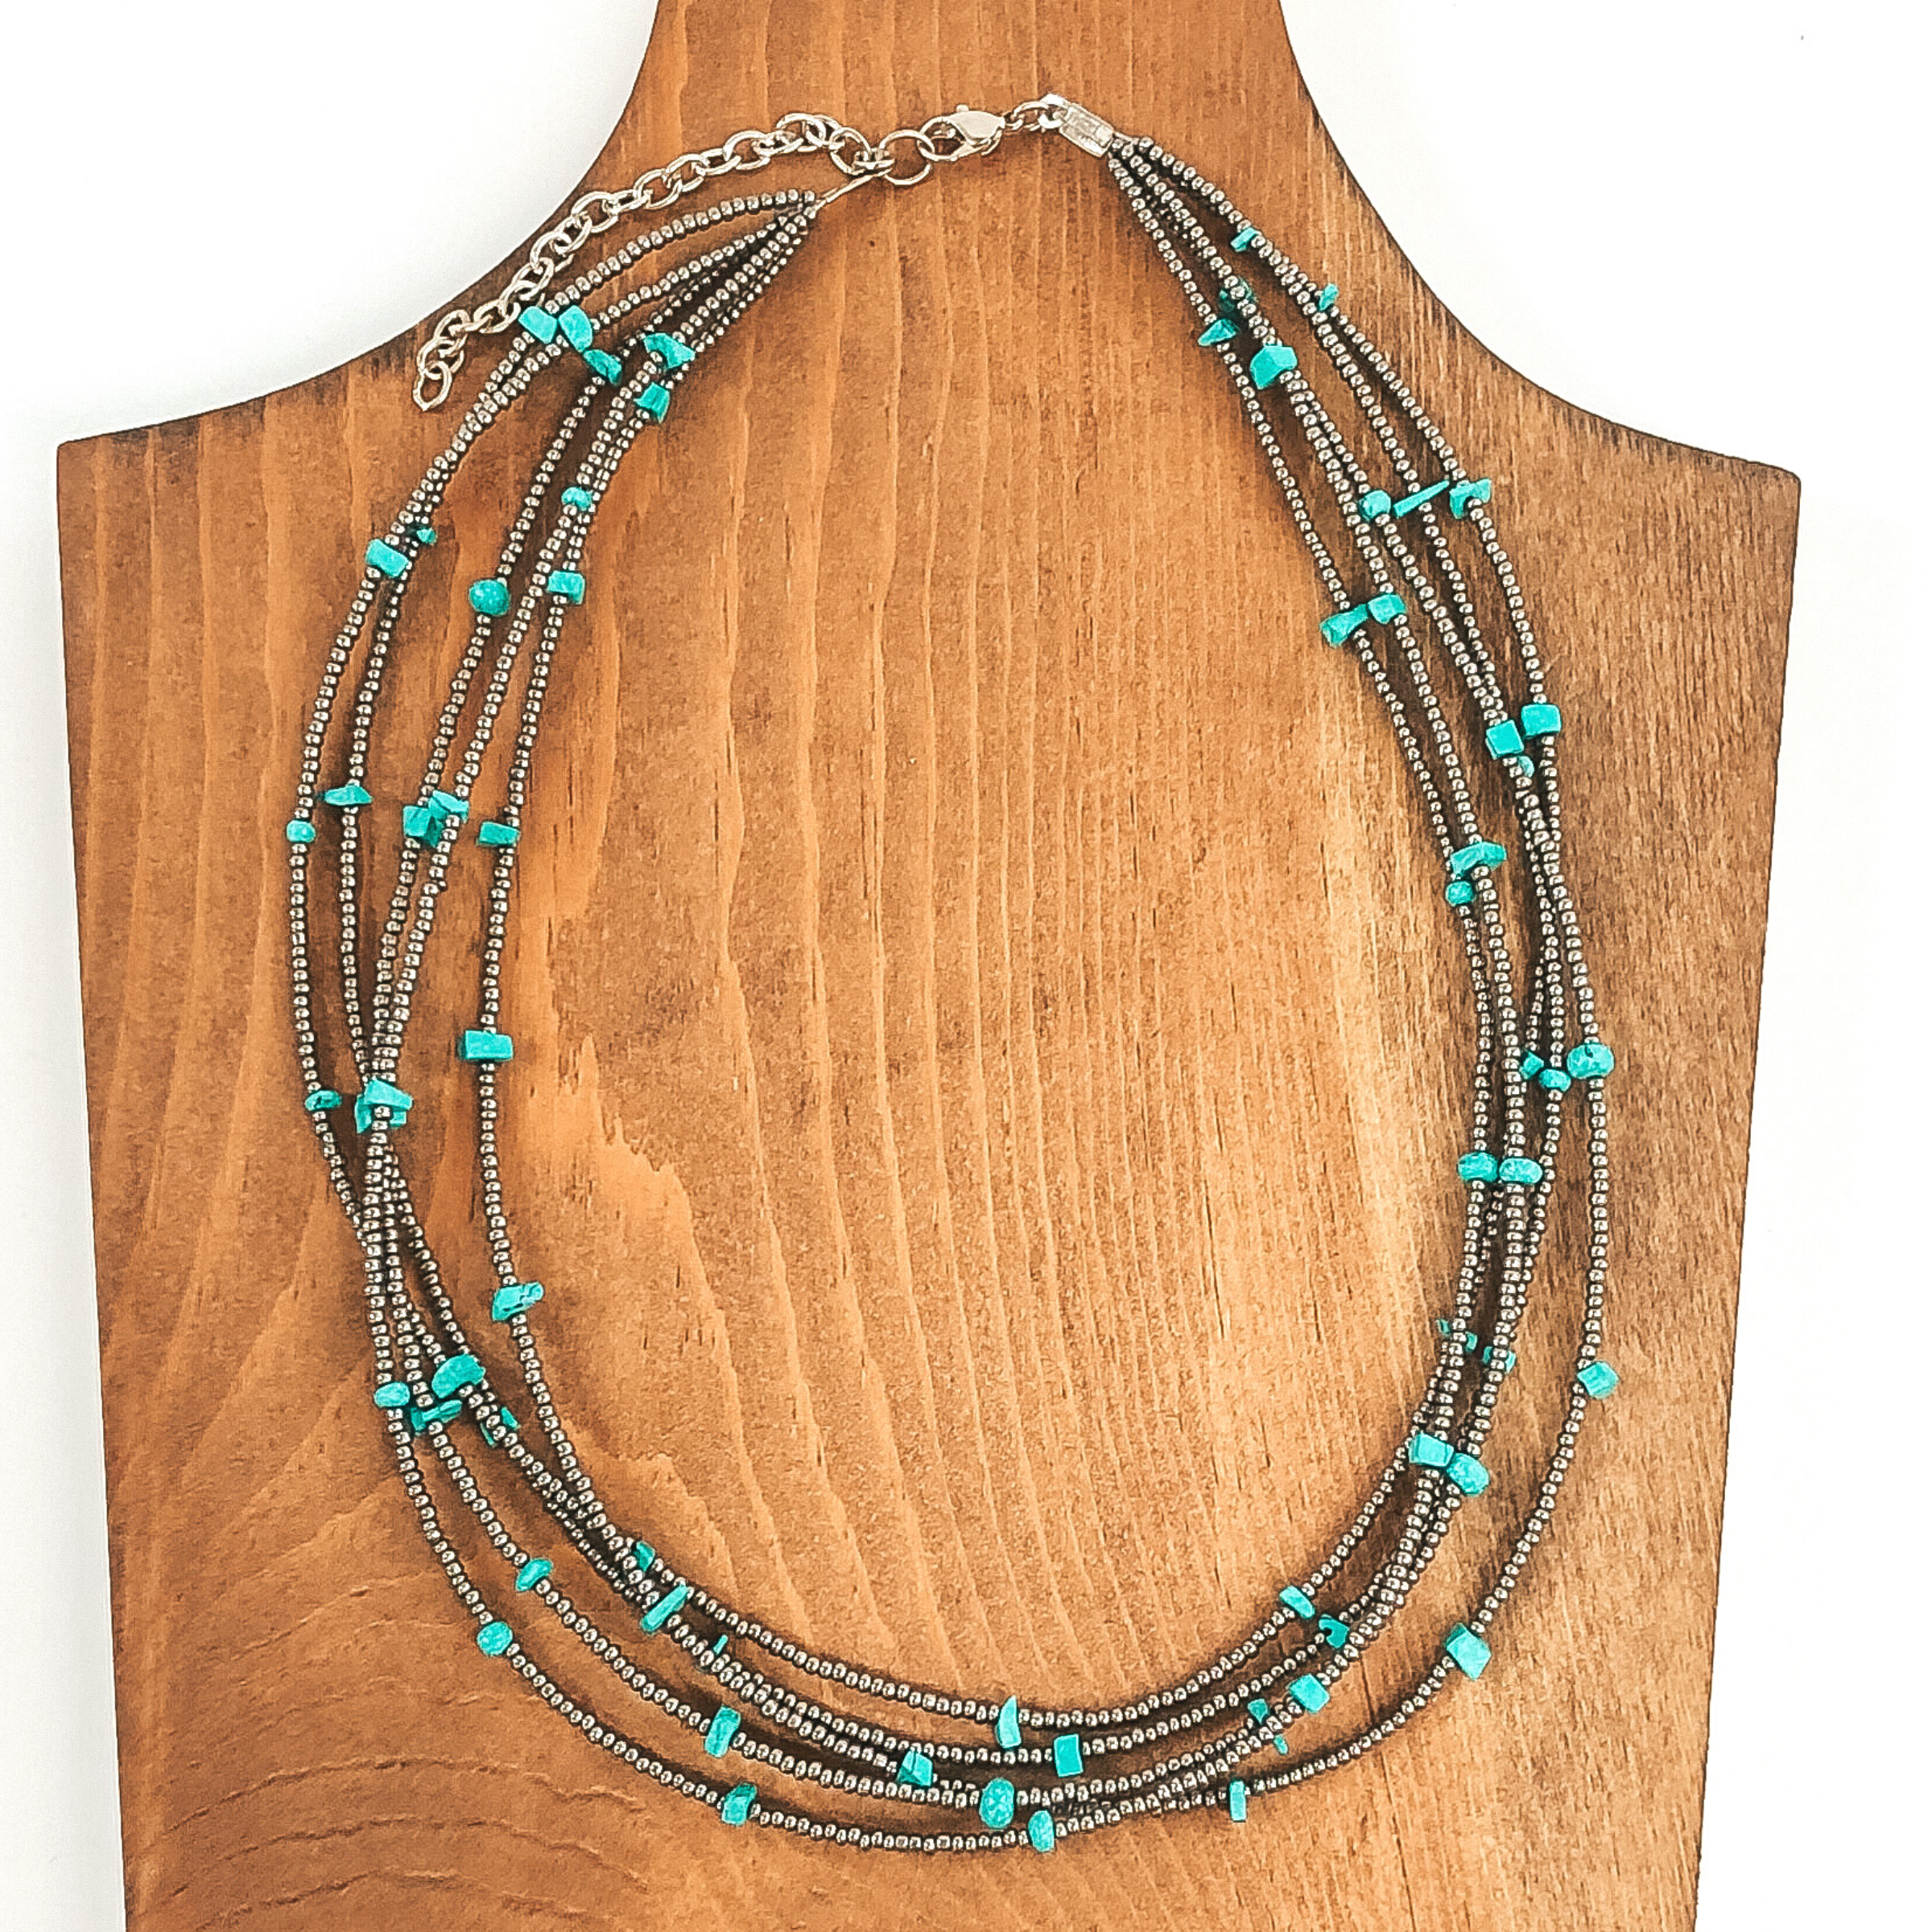 This necklace has multiple layers of seed beaded silver strands. Each strand also has turquoise colored stone spacers that haver irregular shapes. This necklace is pictured laying on a wood necklace holder that is on a white background.